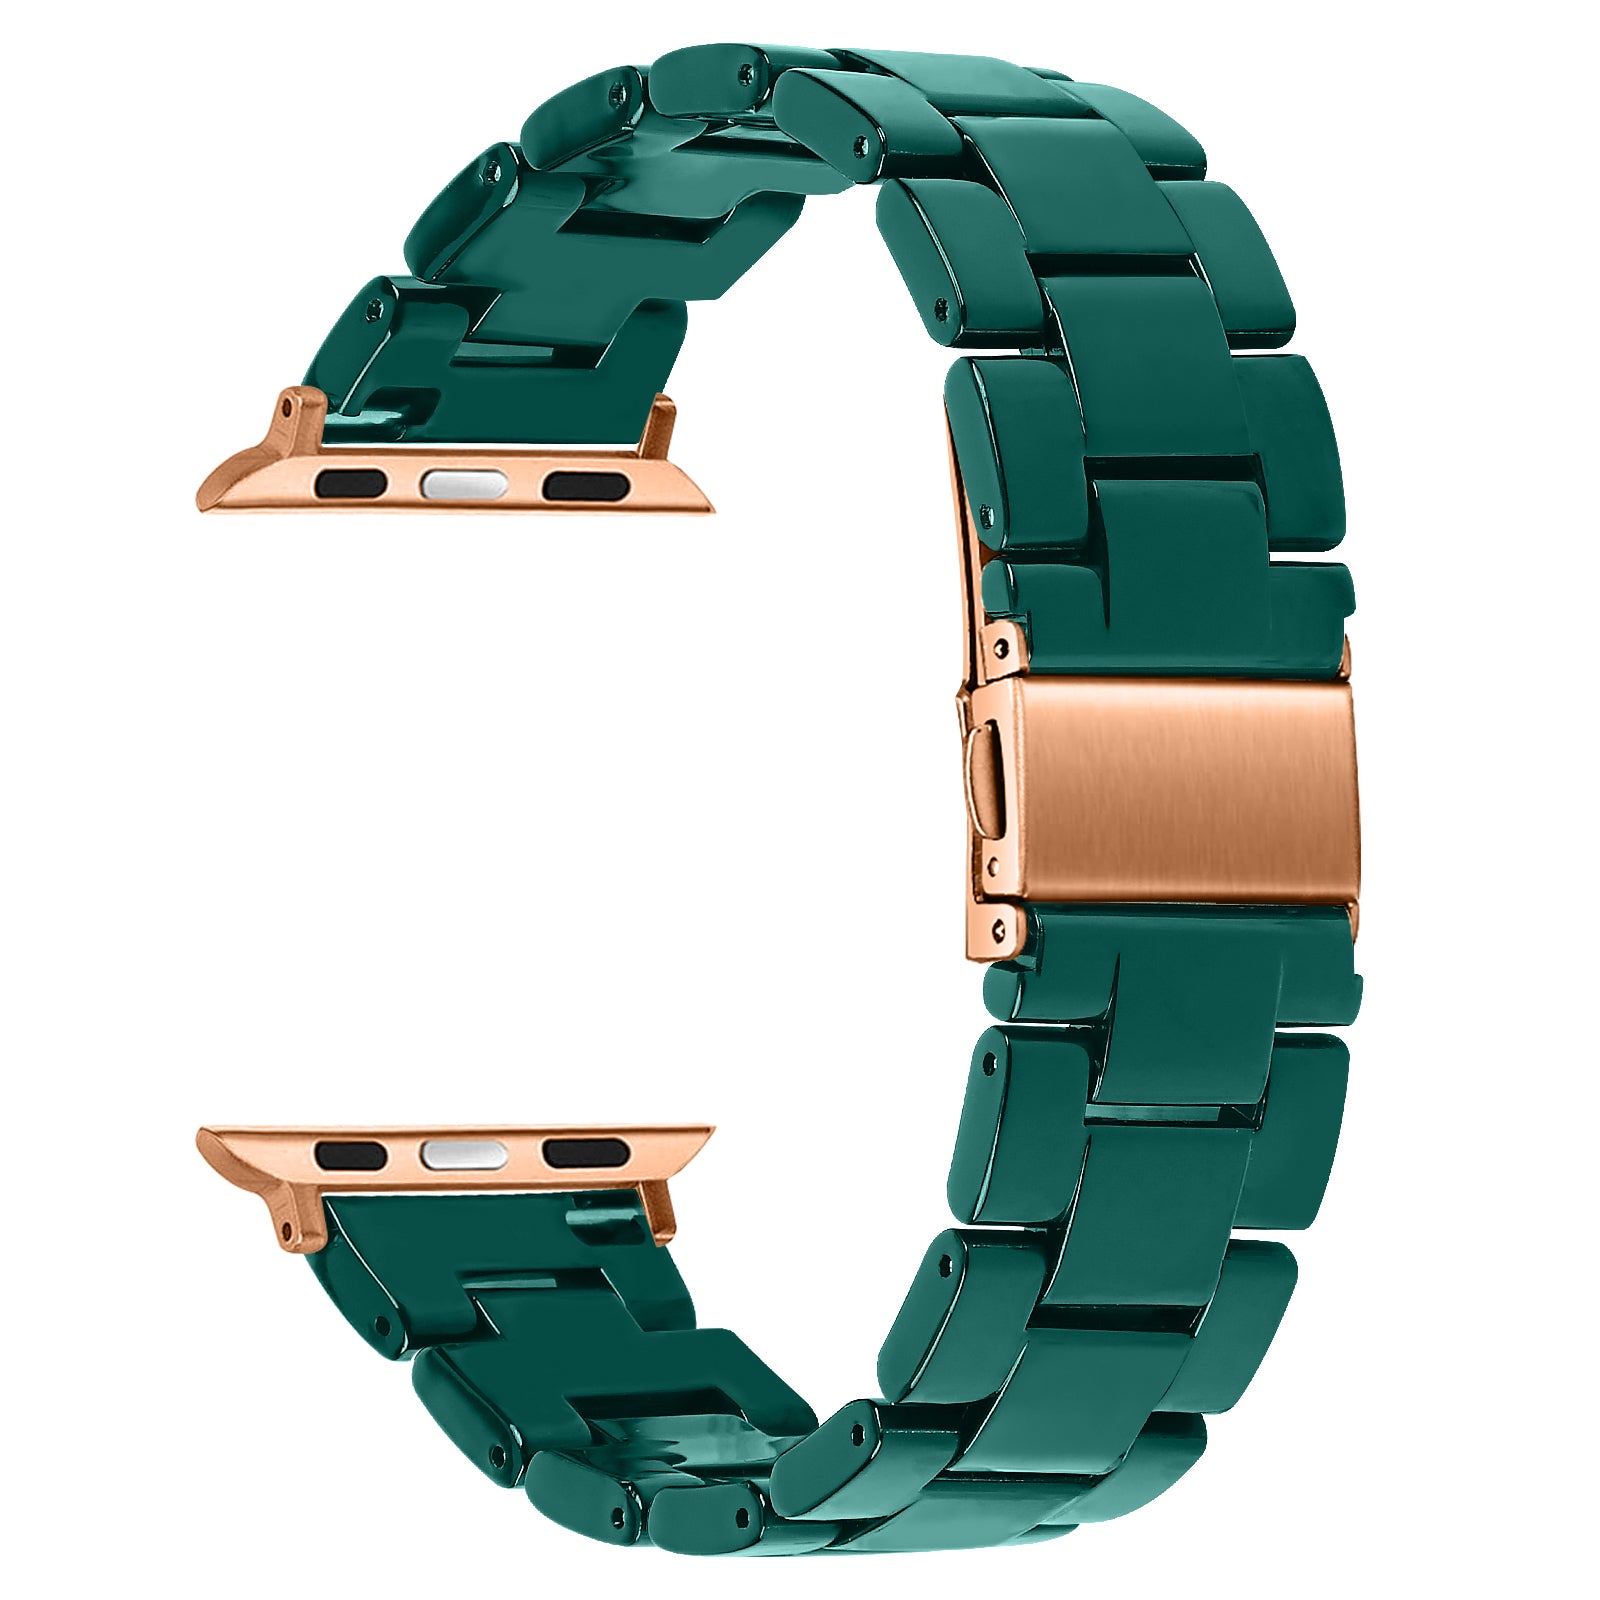 TEEPOLLO Green Resin Apple Watch Band Strap for Women